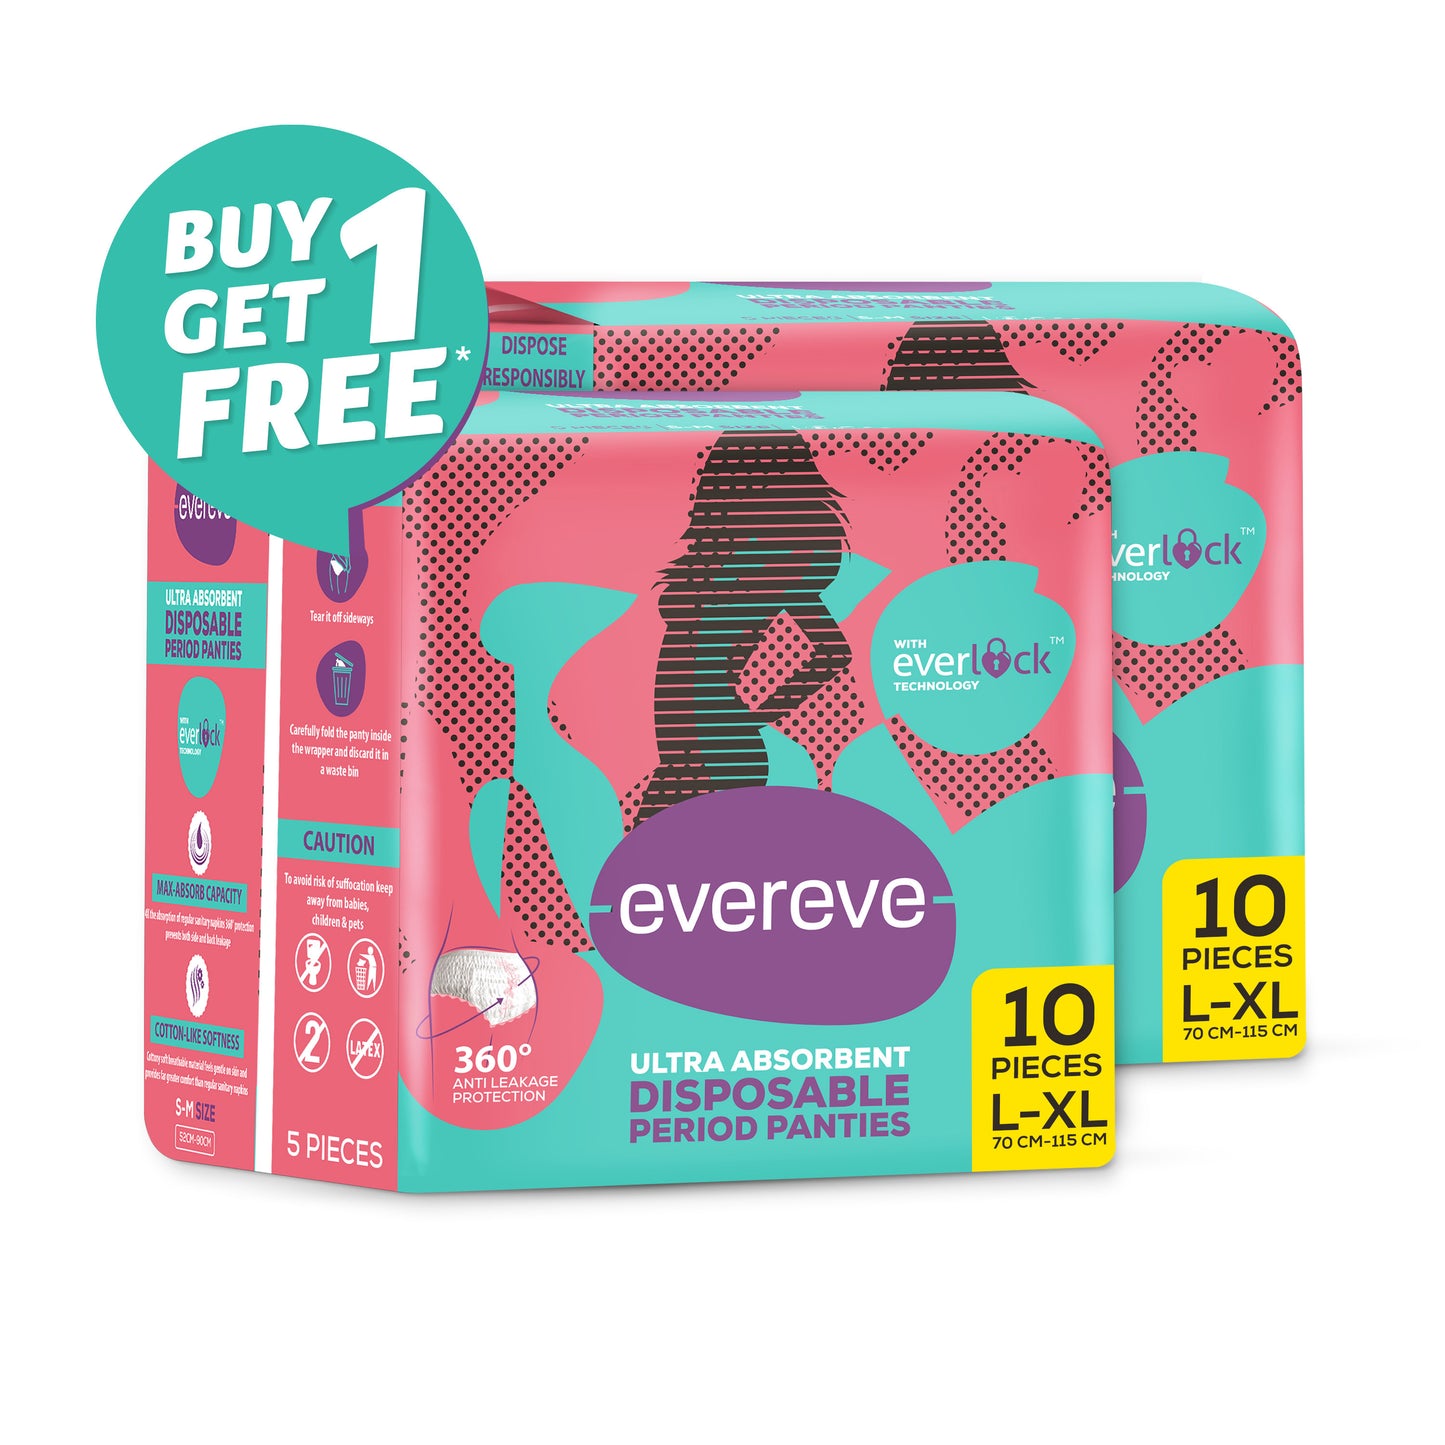 Evereve Ultra Absorbent Disposable Period Panties, L-XL, 10's Pack